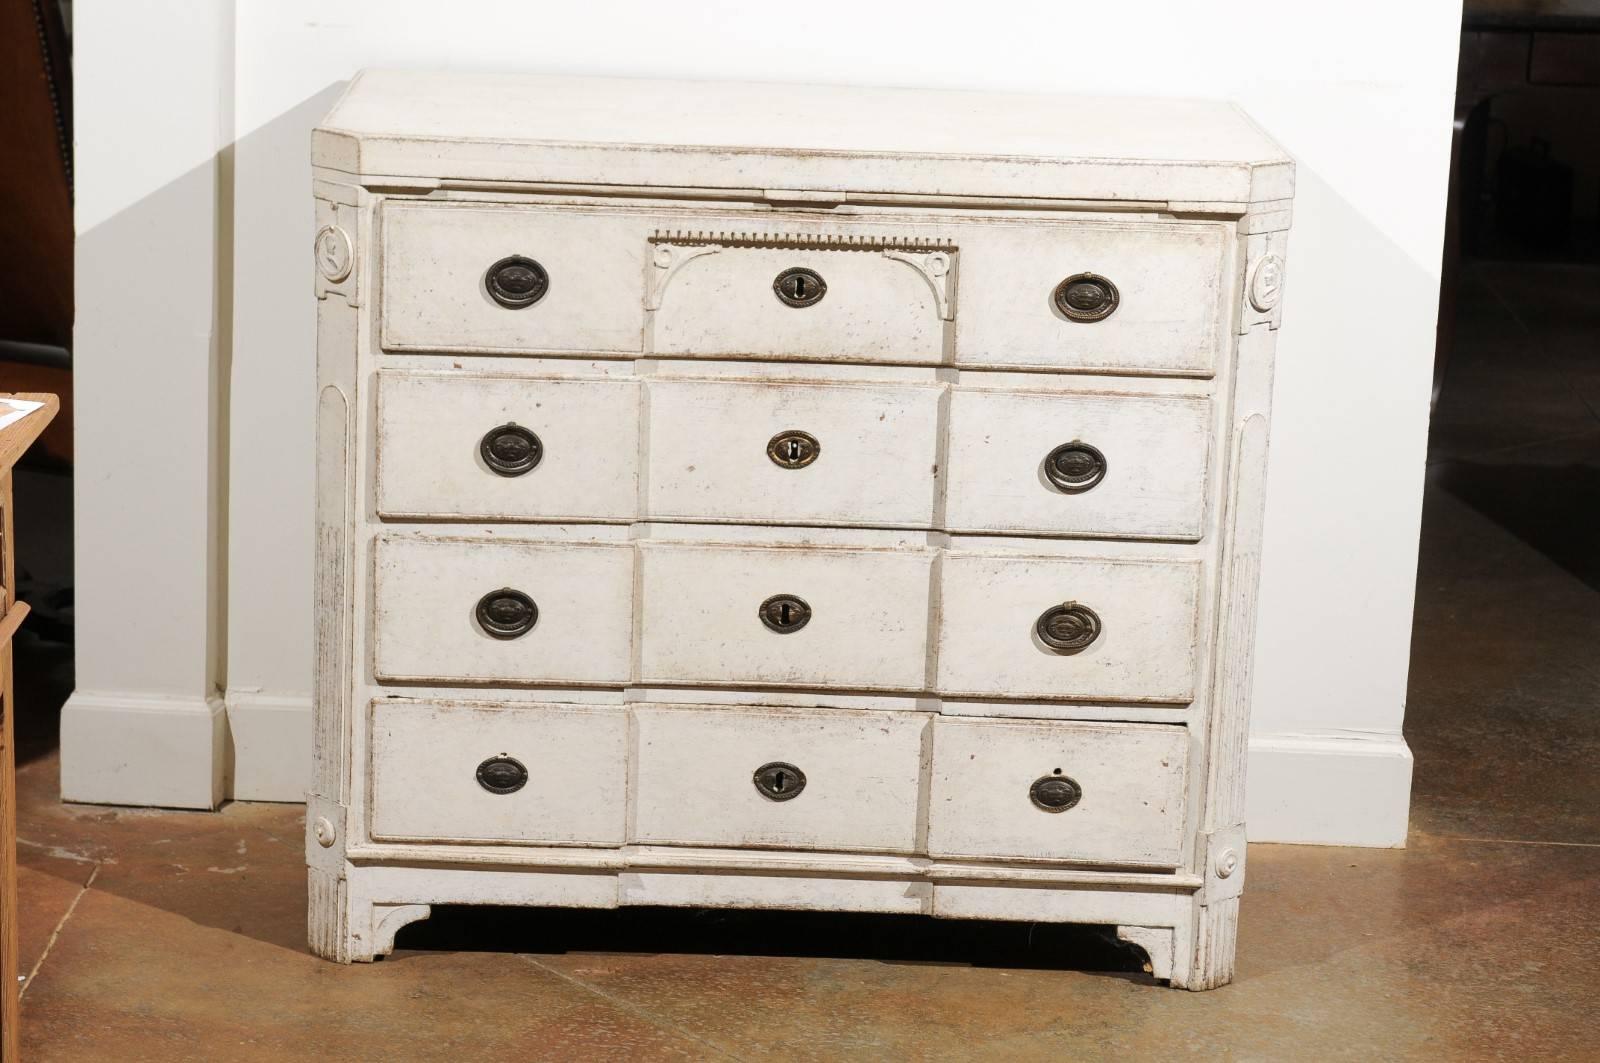 A Swedish period Gustavian breakfront painted four-drawer commode from the late 18th century. This Swedish Gustavian chest features a rectangular top with canted corners in the front, sitting above a breakfront façade. The four hand-cut dovetailed